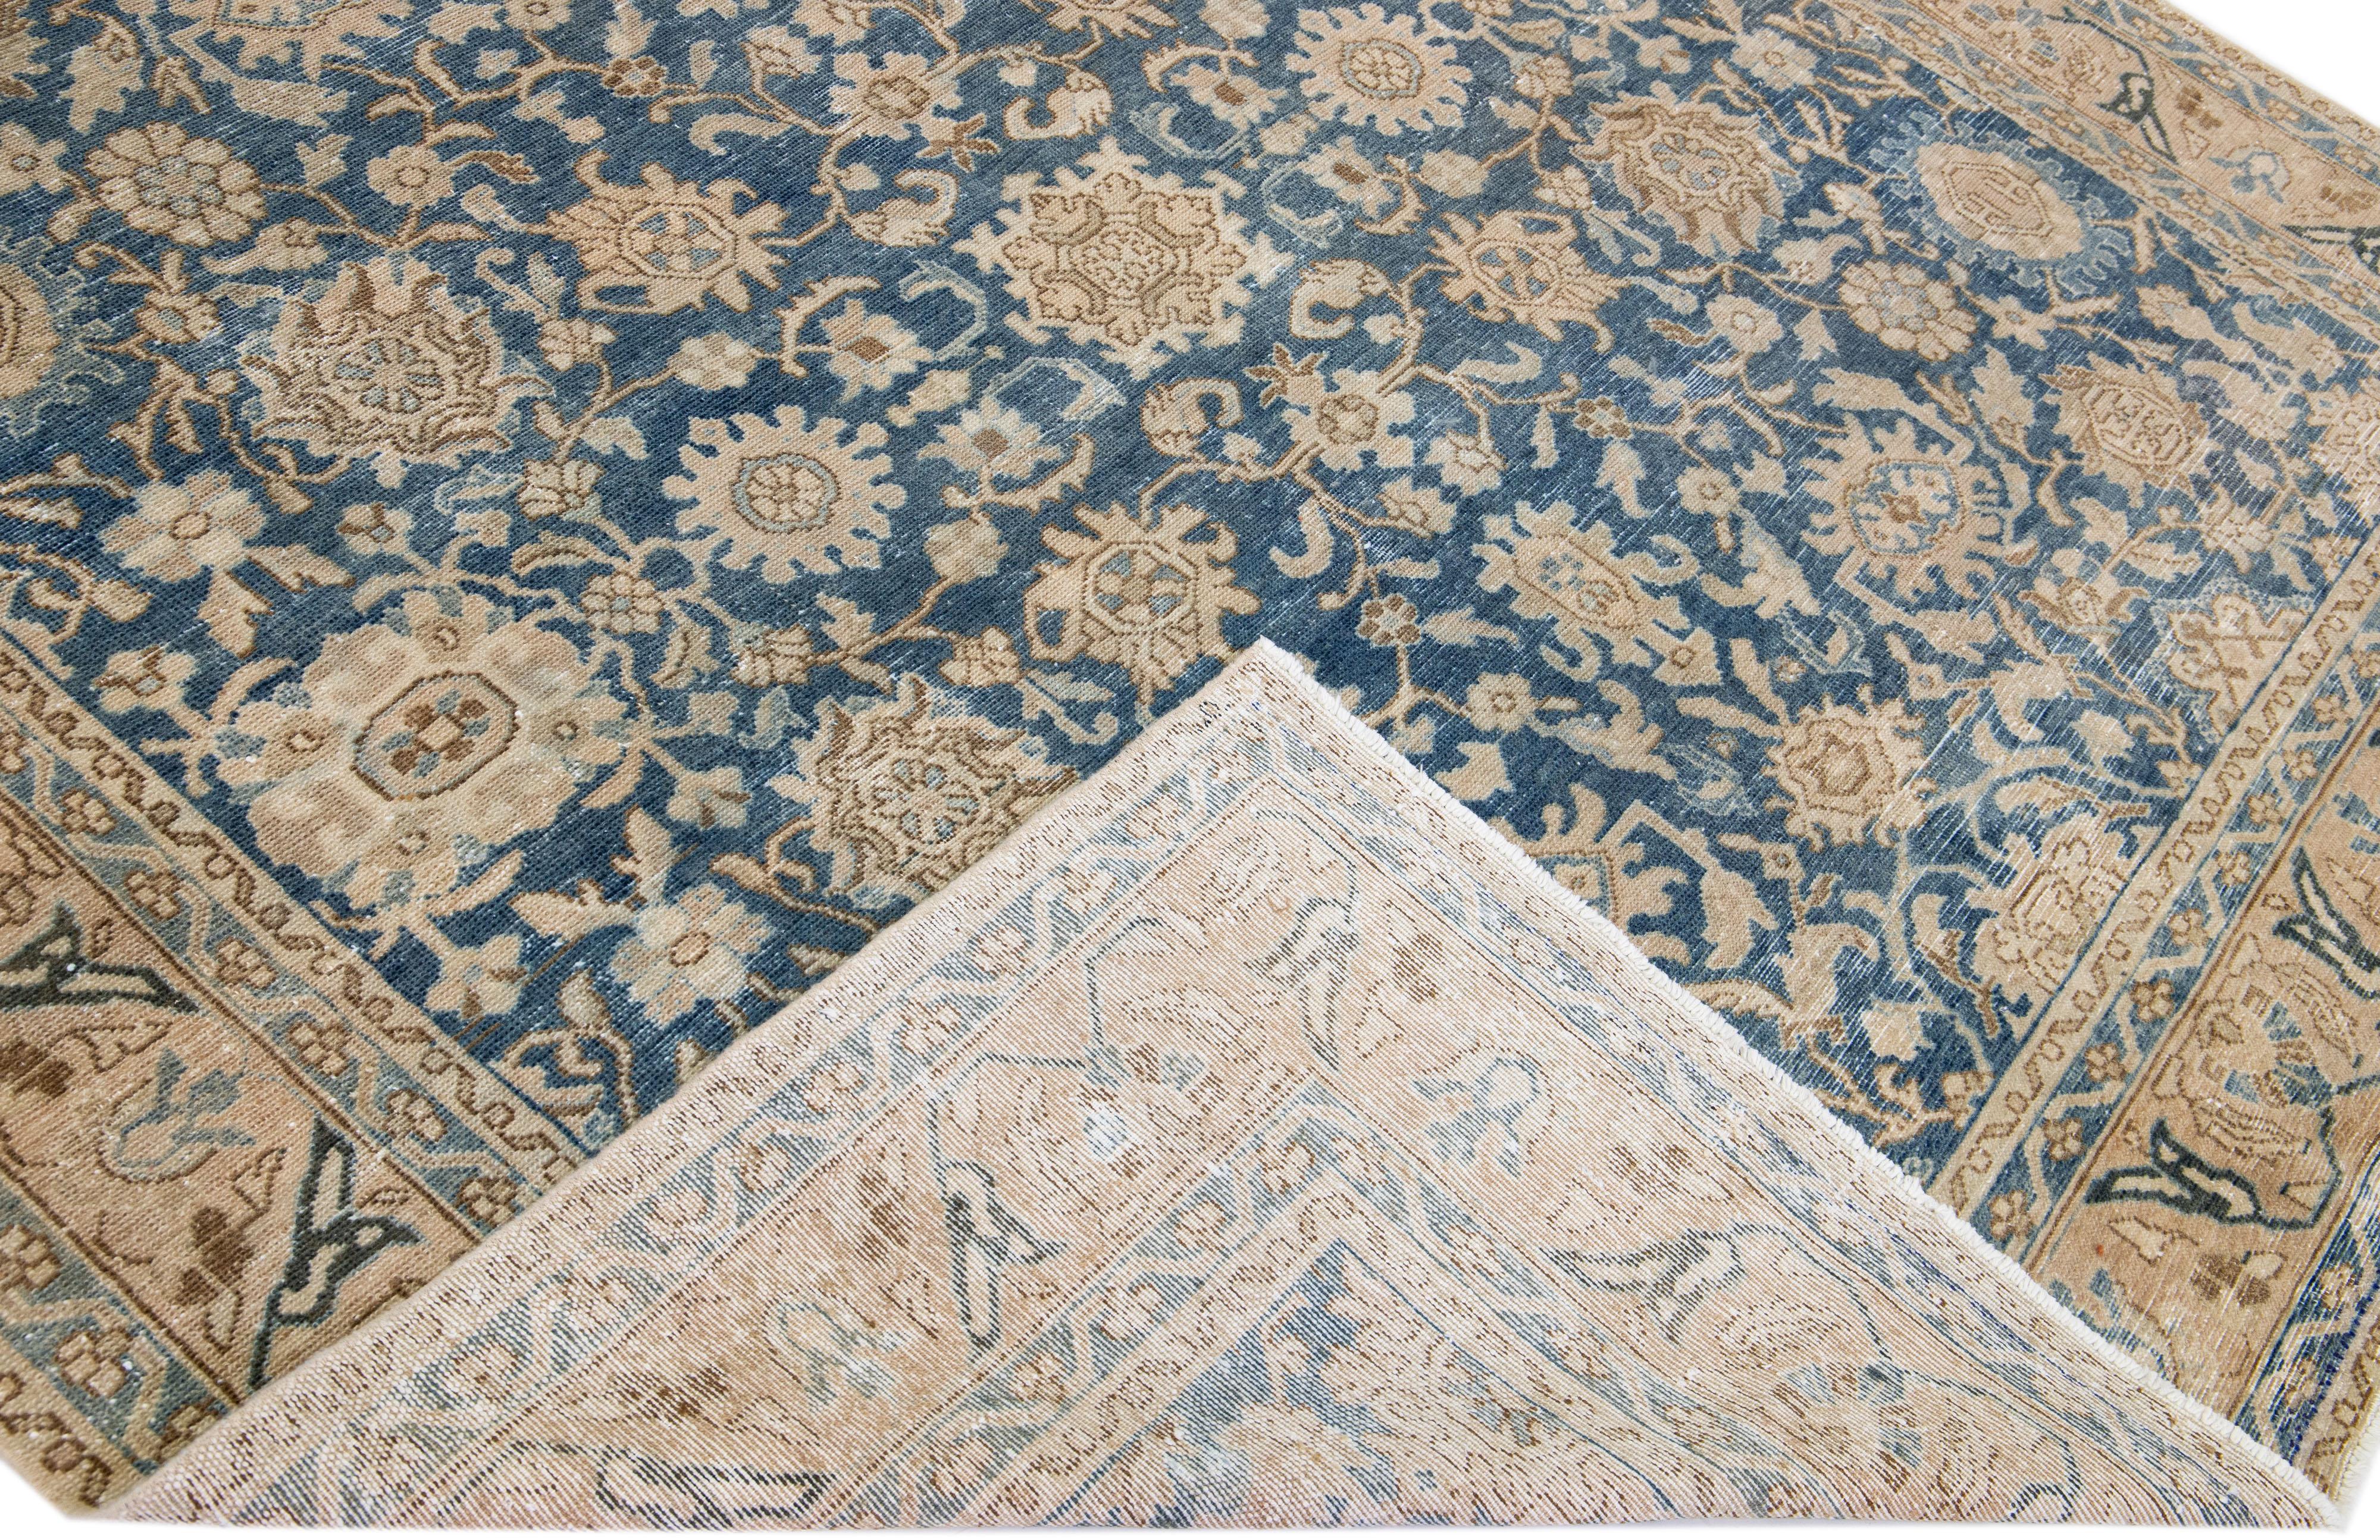 Beautiful Antique Malayer hand-knotted wool rug with a blue color field. This Persian rug has a beige frame and accents in a gorgeous all-over floral motif.

This rug measures 7'2